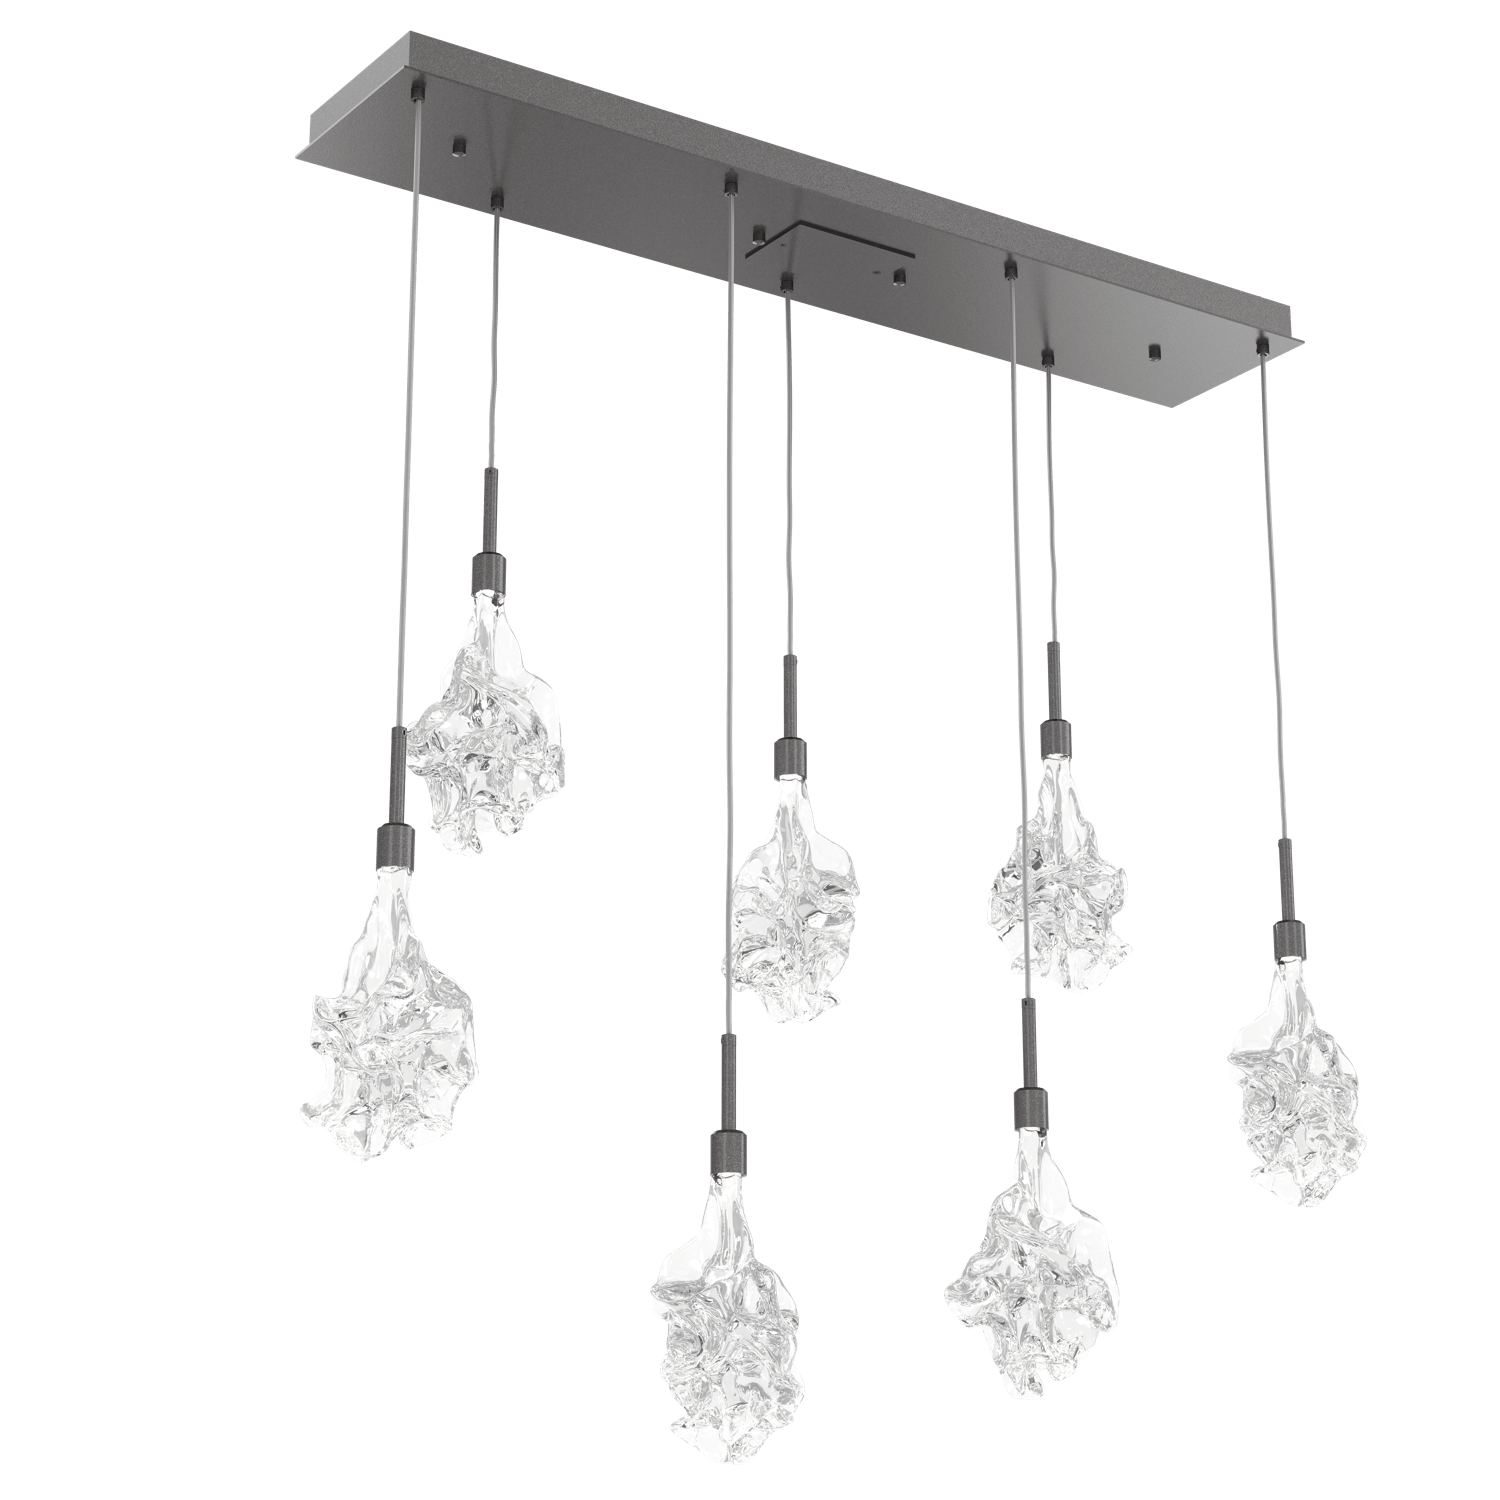 PLB0059-07-GP-Hammerton-Studio-Blossom-7-light-linear-pendant-chandelier-with-graphite-finish-and-clear-handblown-crystal-glass-shades-and-LED-lamping